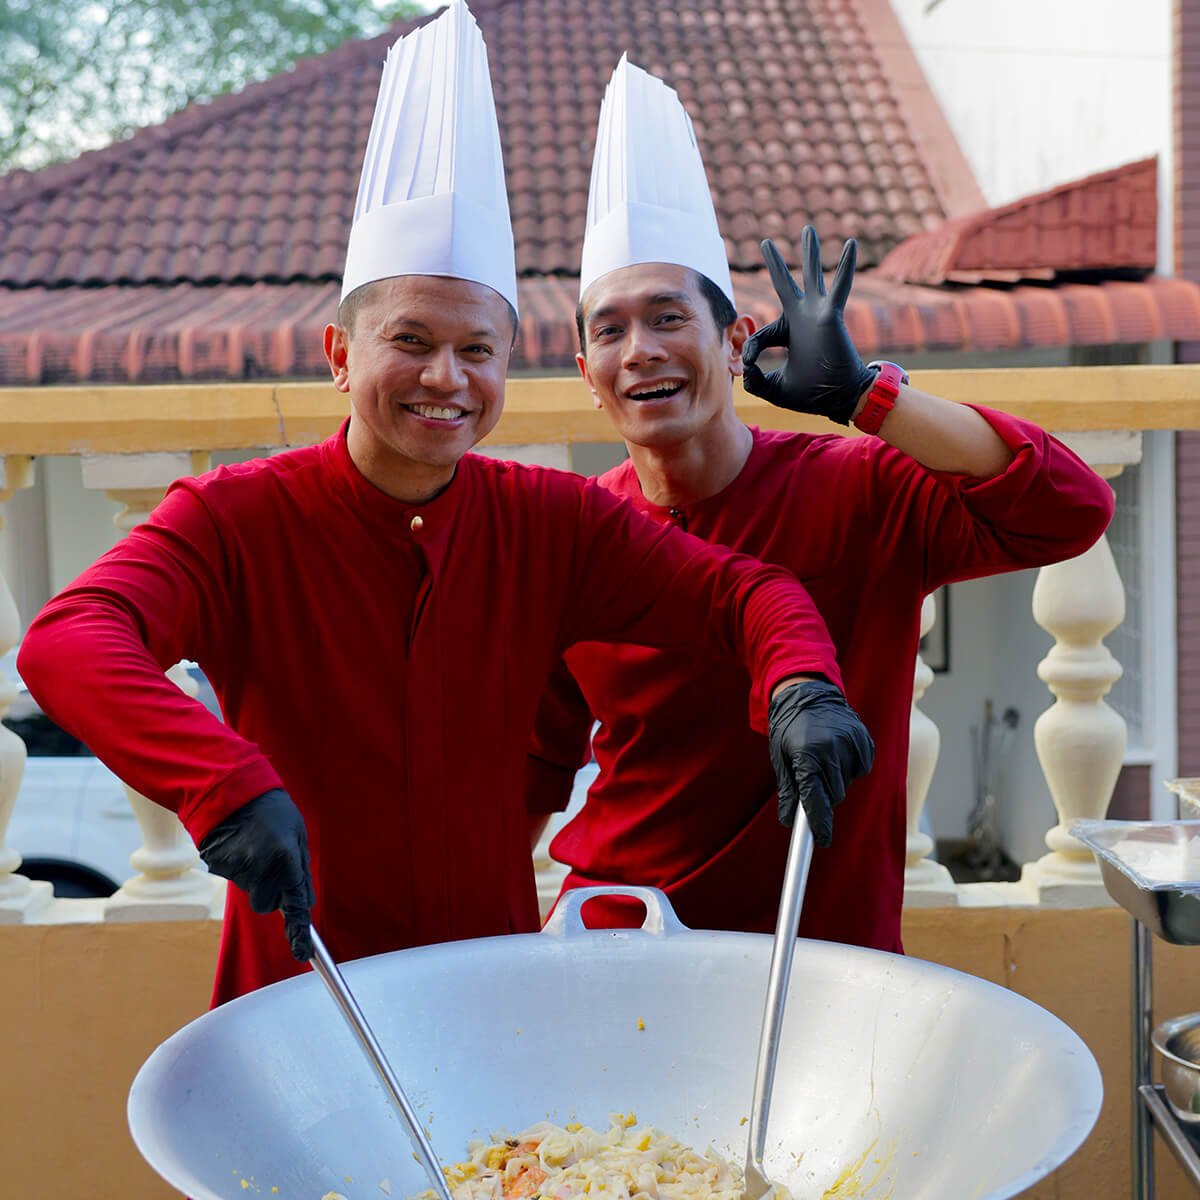 A mid-shot of Fahrin Ahmad and Shah Shamshiri cooking and smiling for the camera.